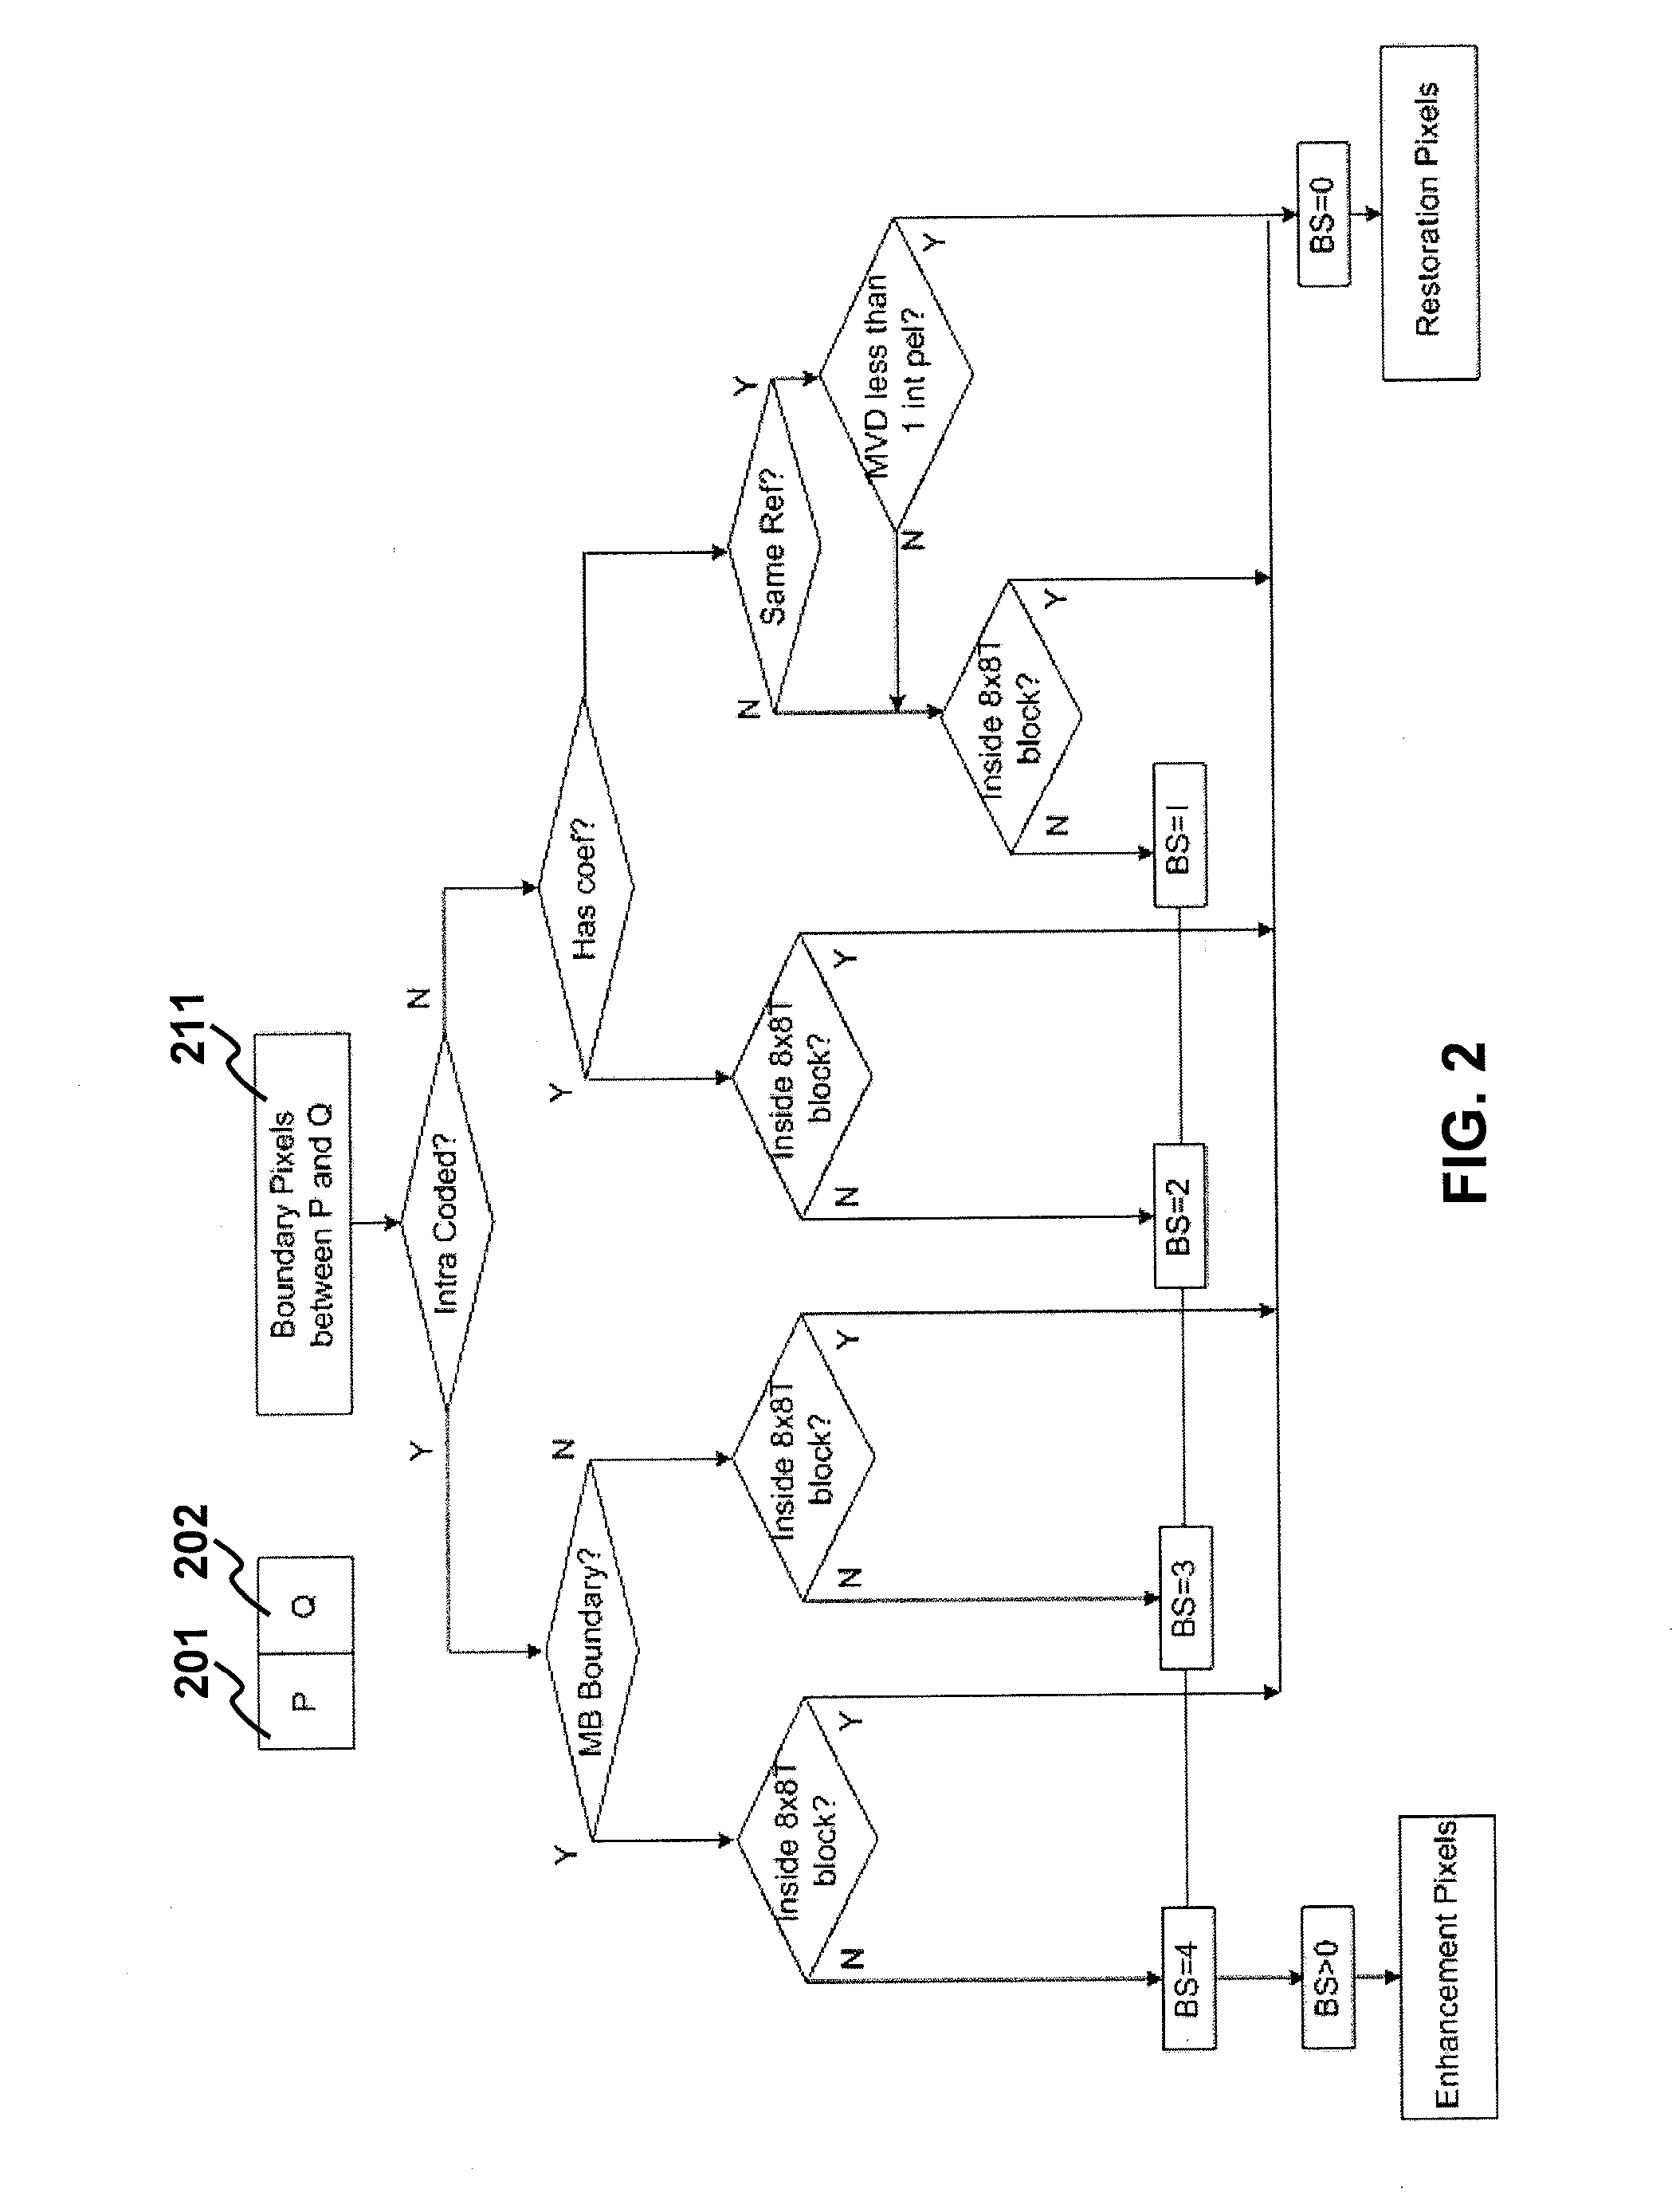 Method and apparatus for improving video quality